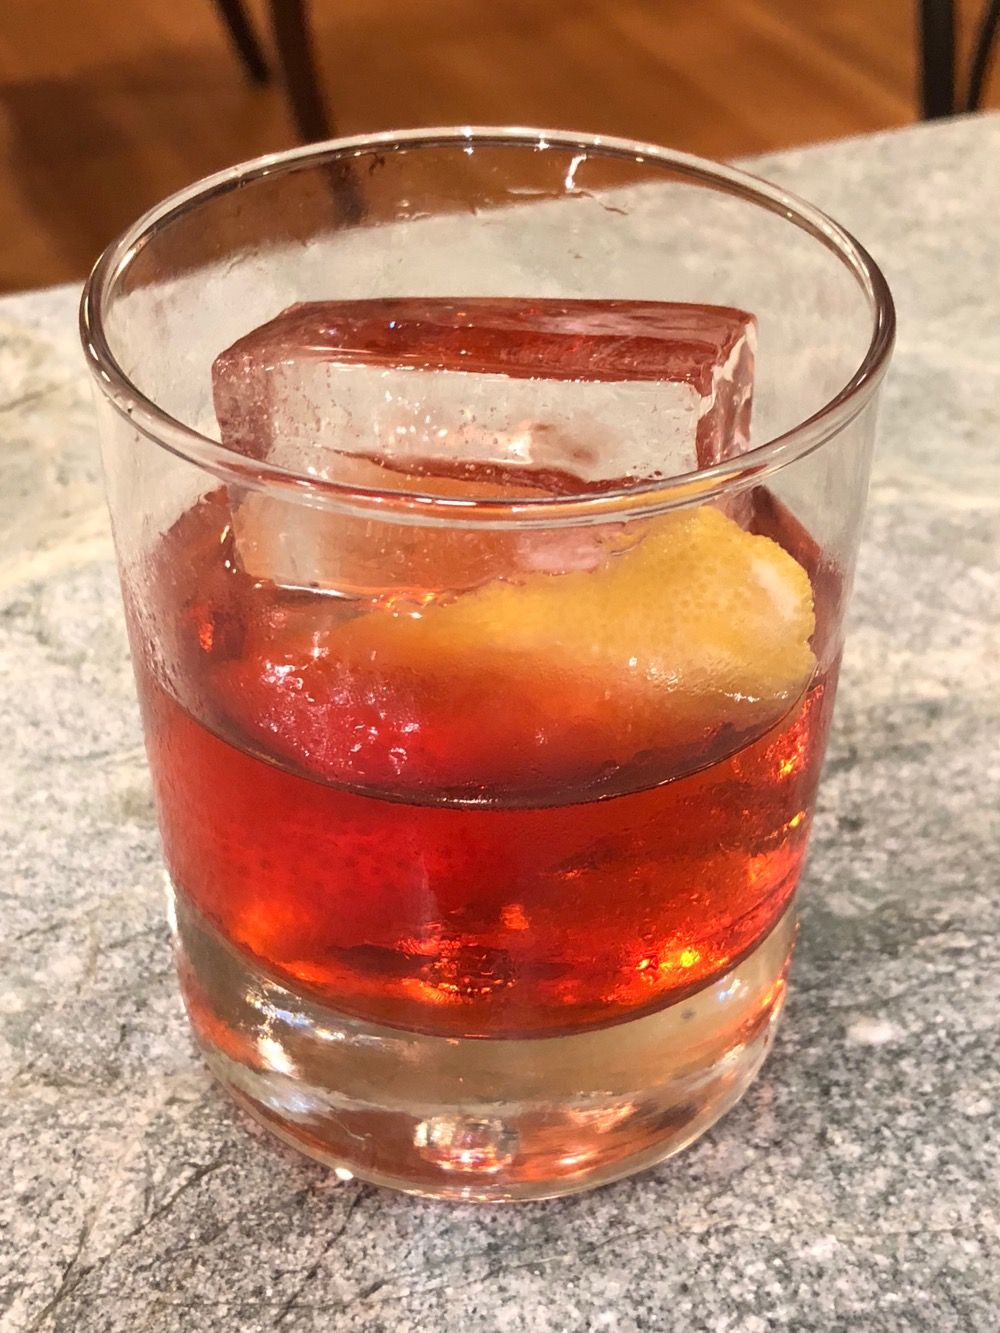 Negroni with sherry vermouth and hand-cut ice.